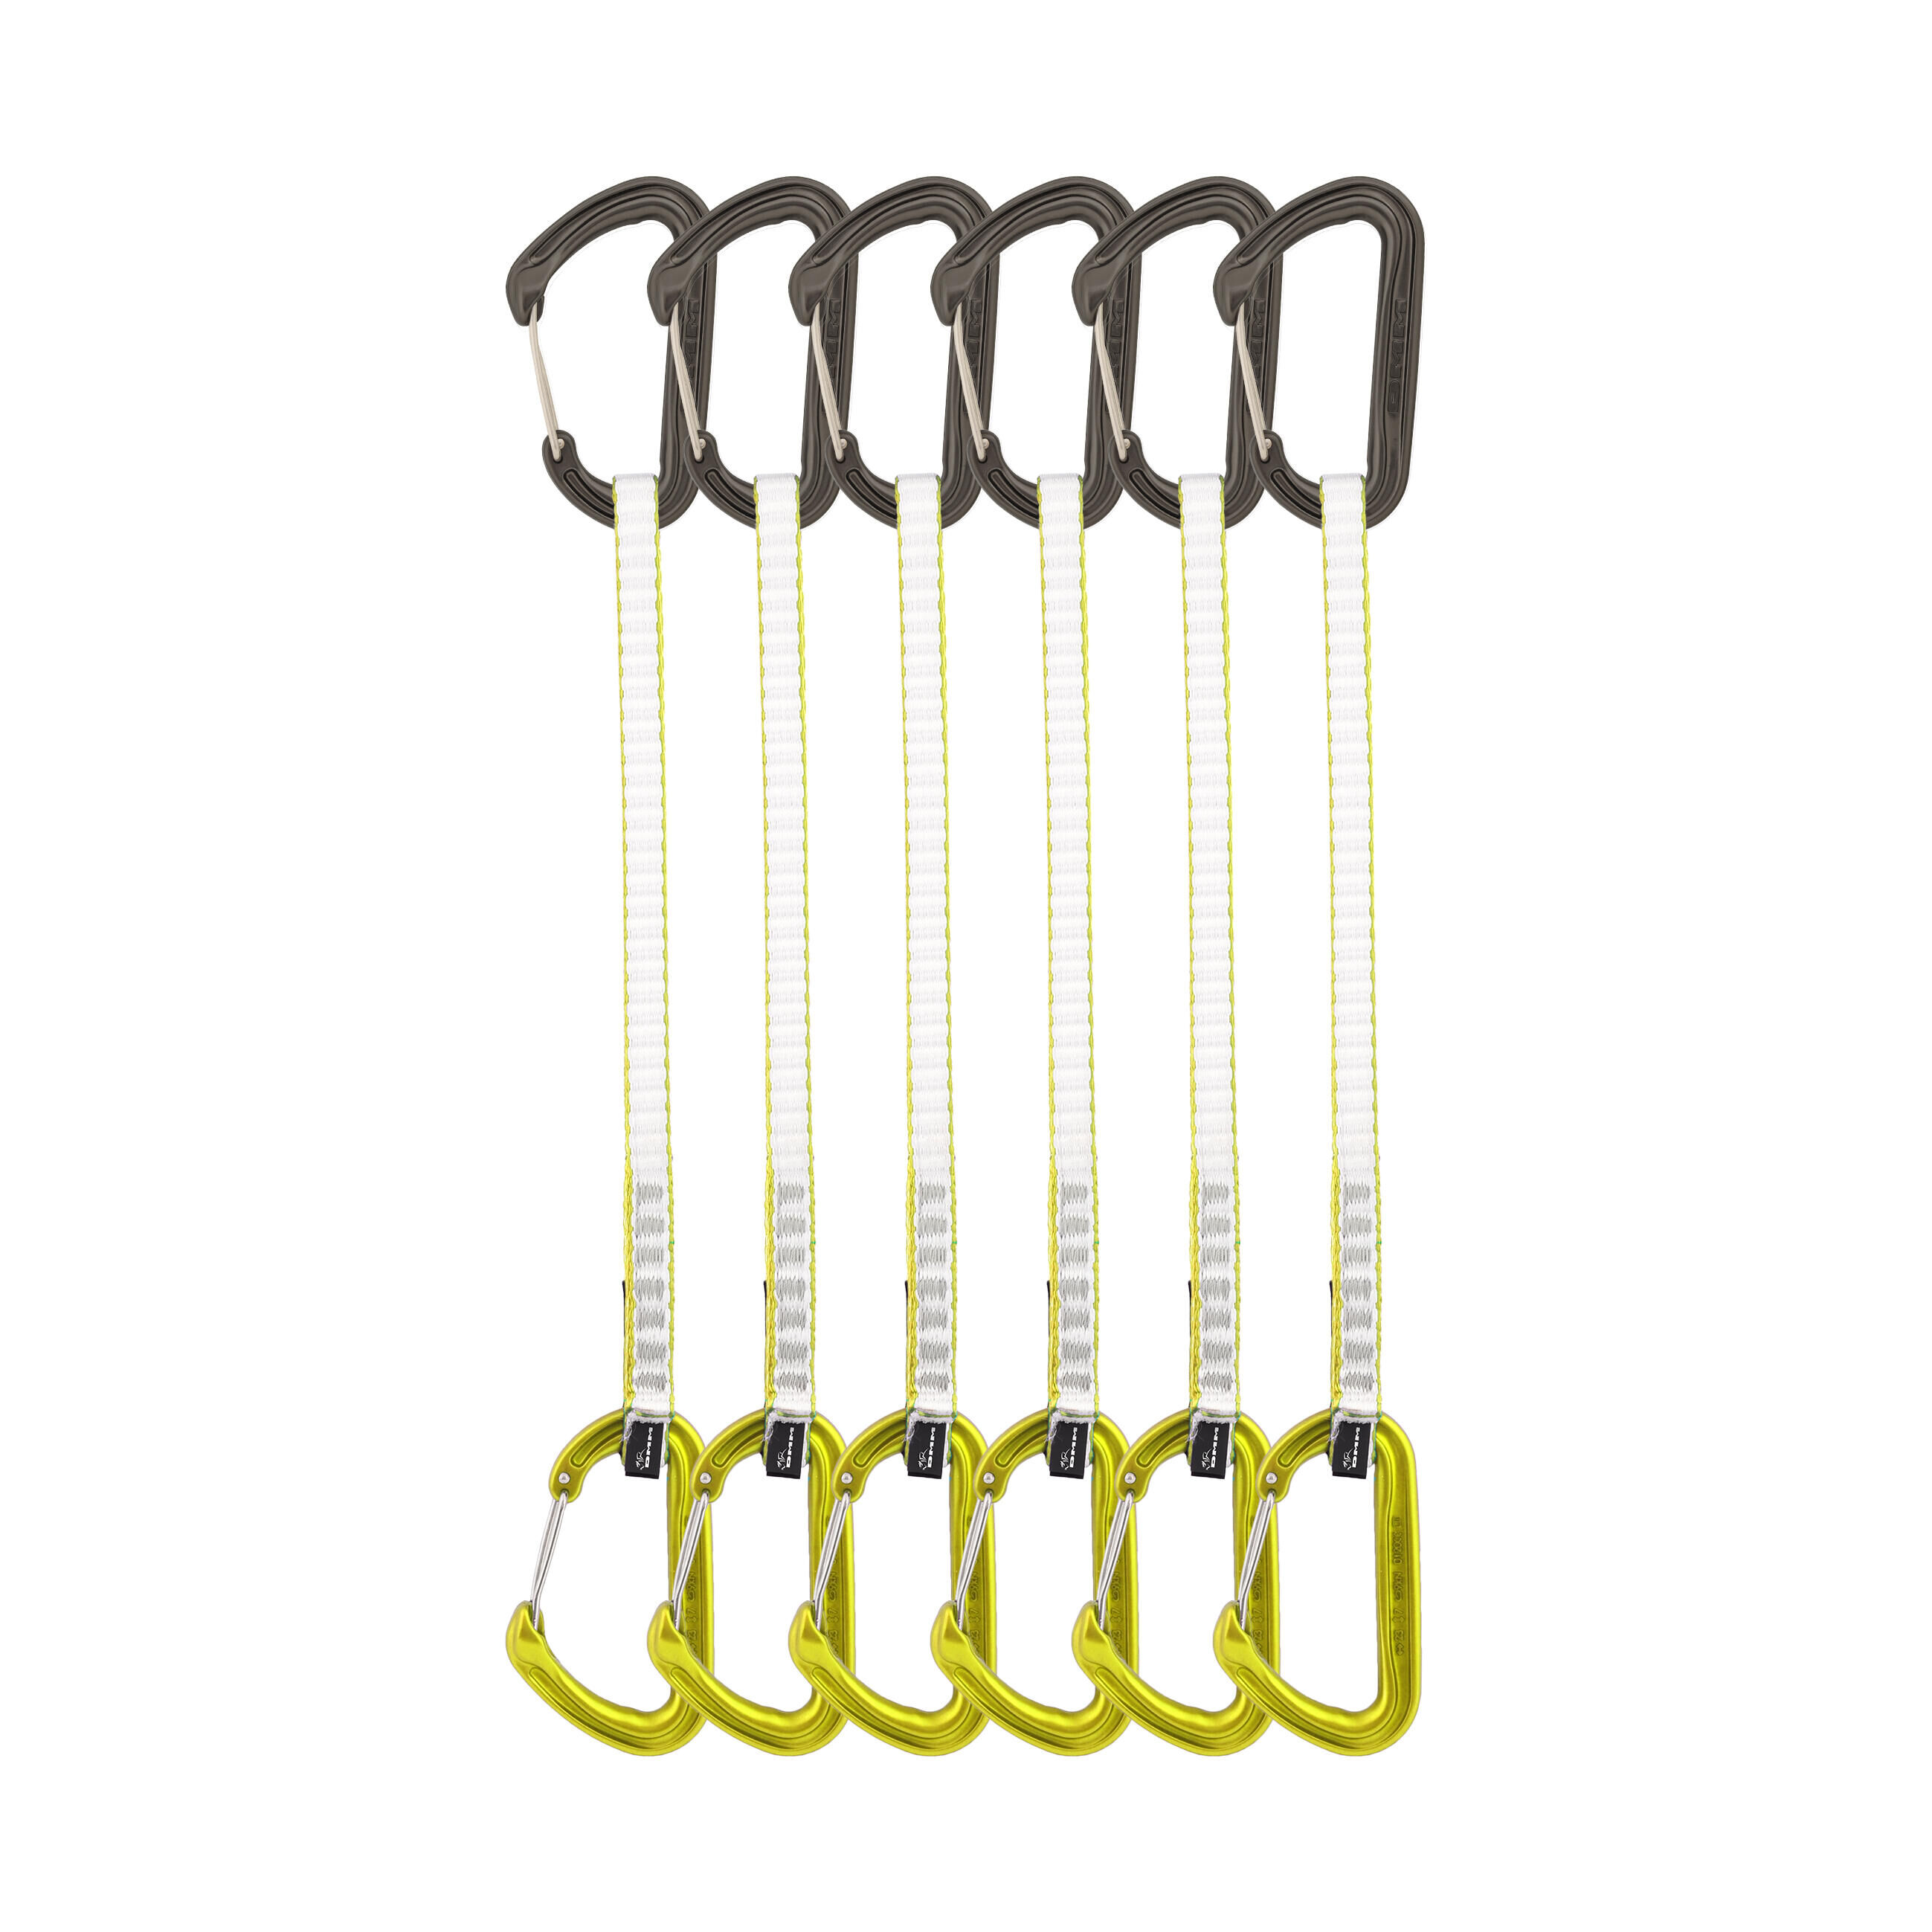 DMM Chimera Quickdraw 25cm - Lime - 6 Pack